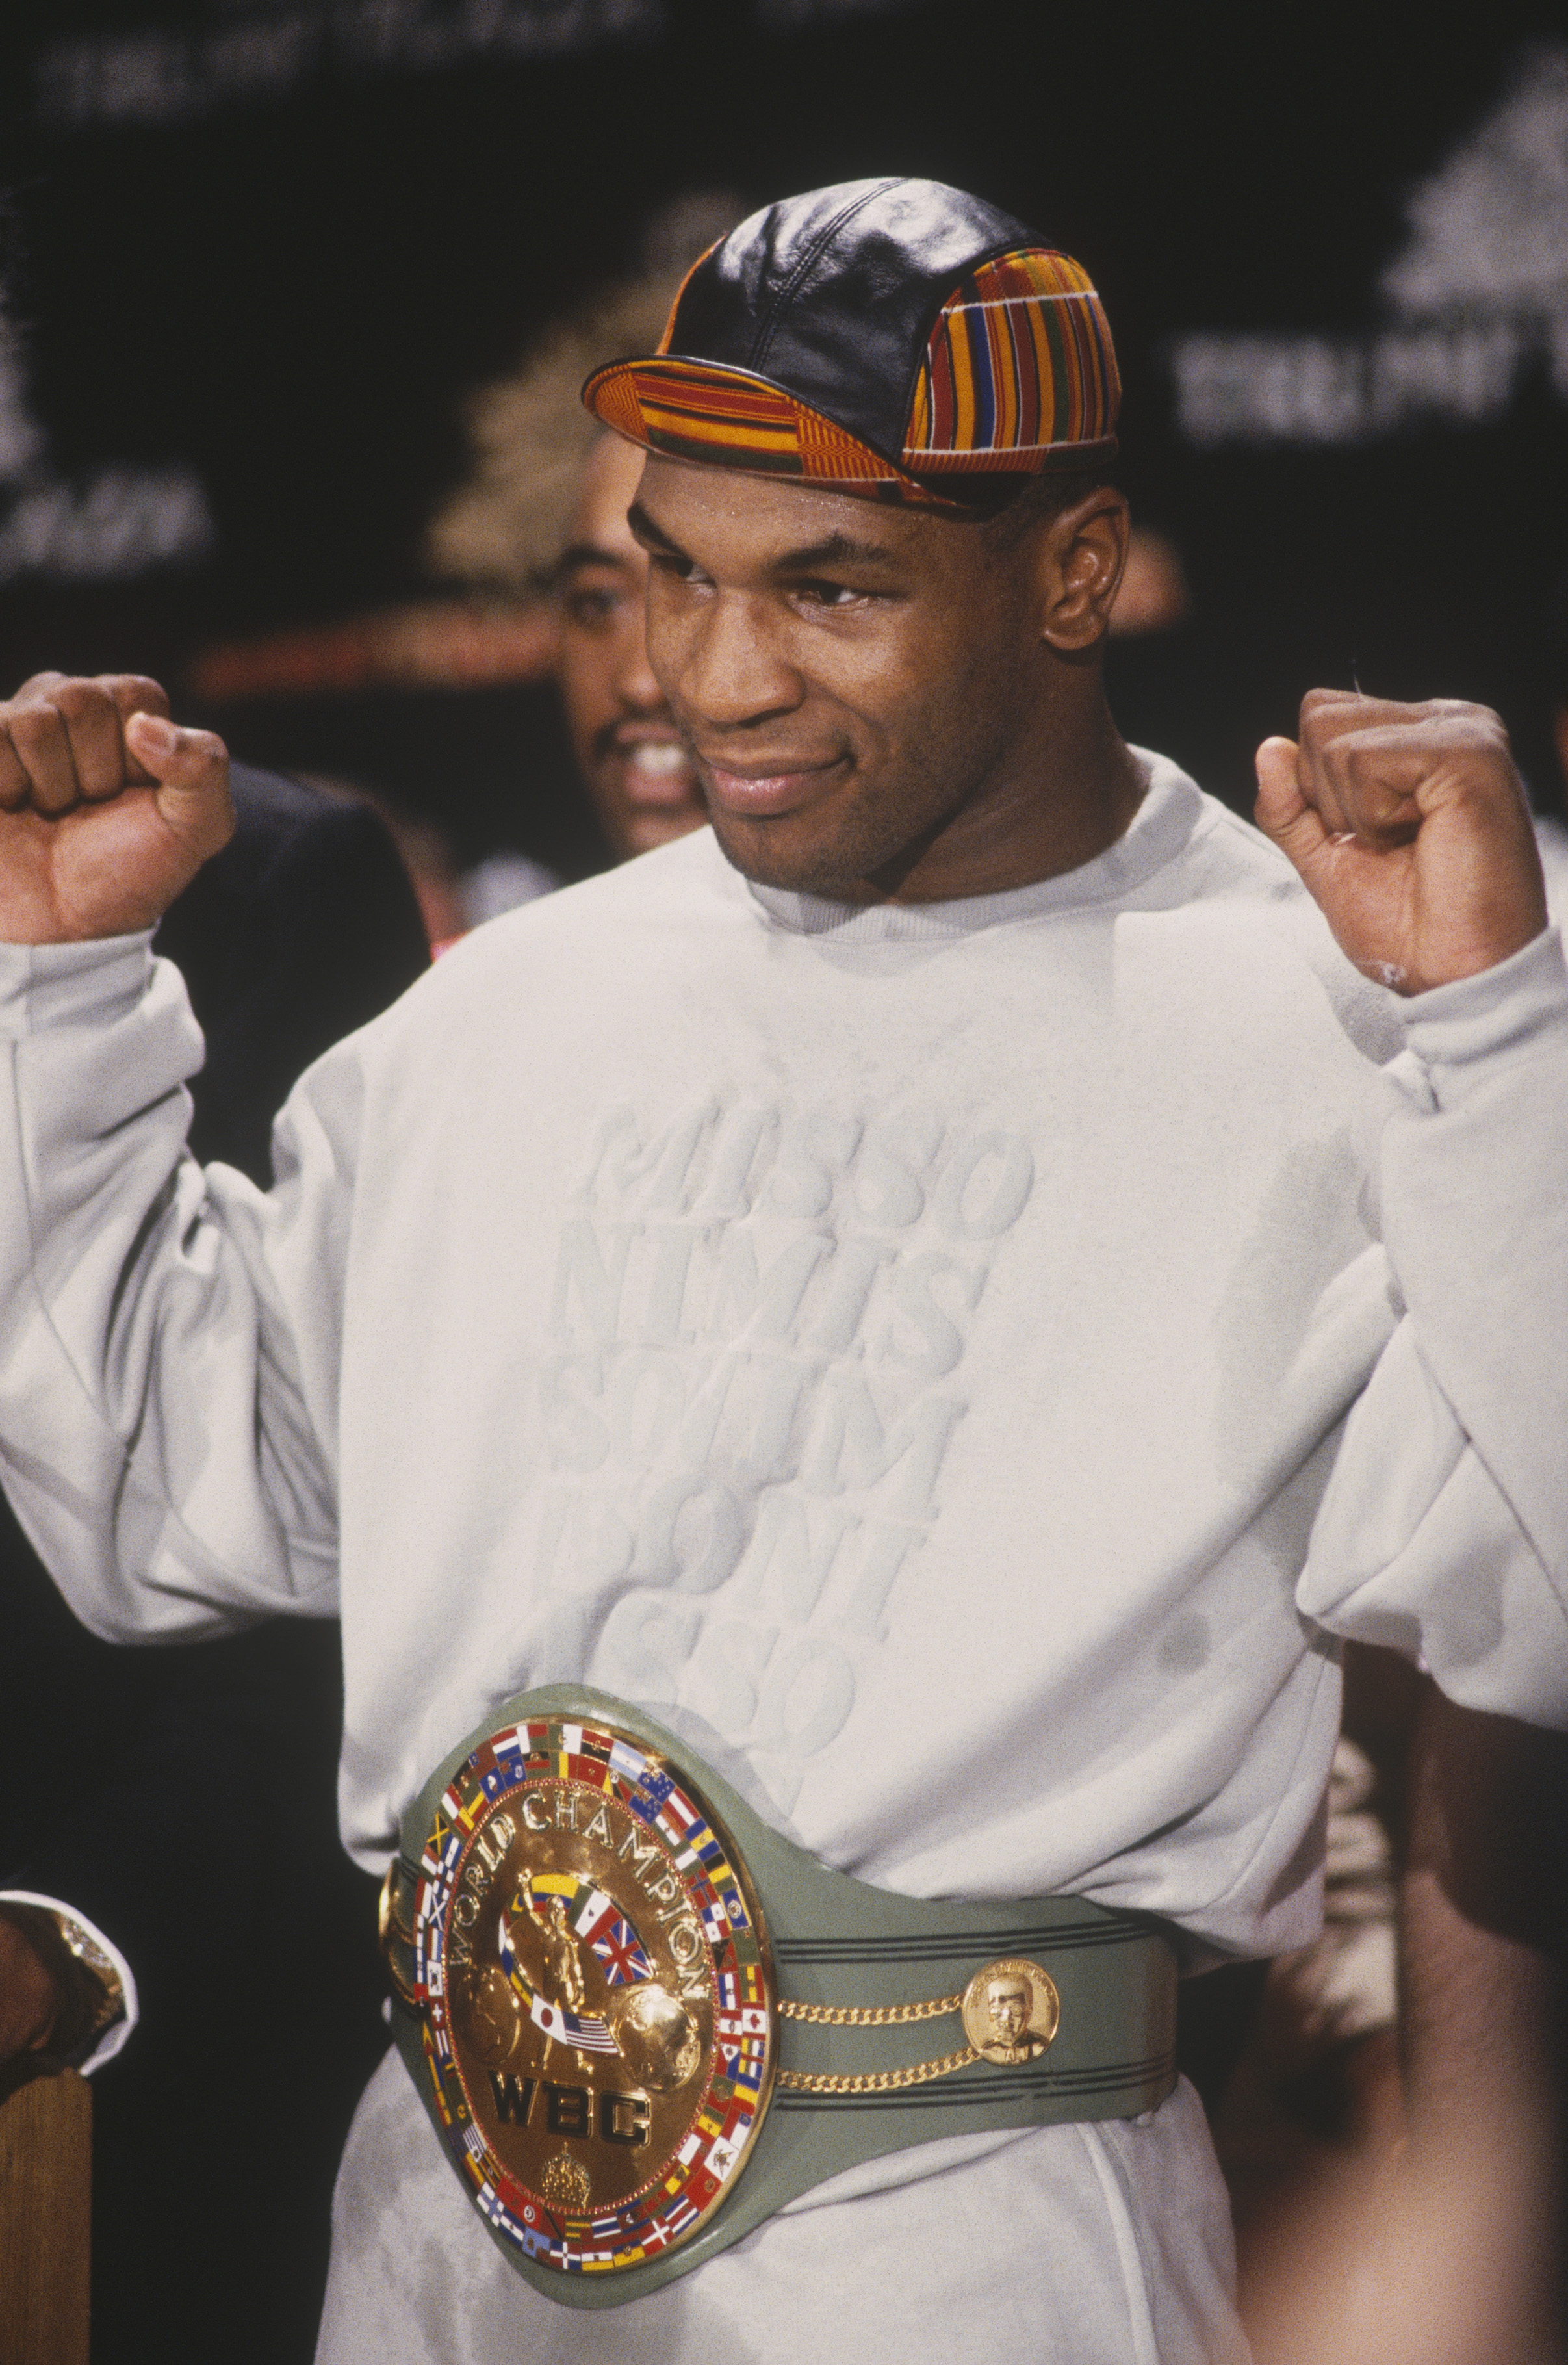 Mike Tyson posing for cameras during an undated press conference | Source: Getty Images